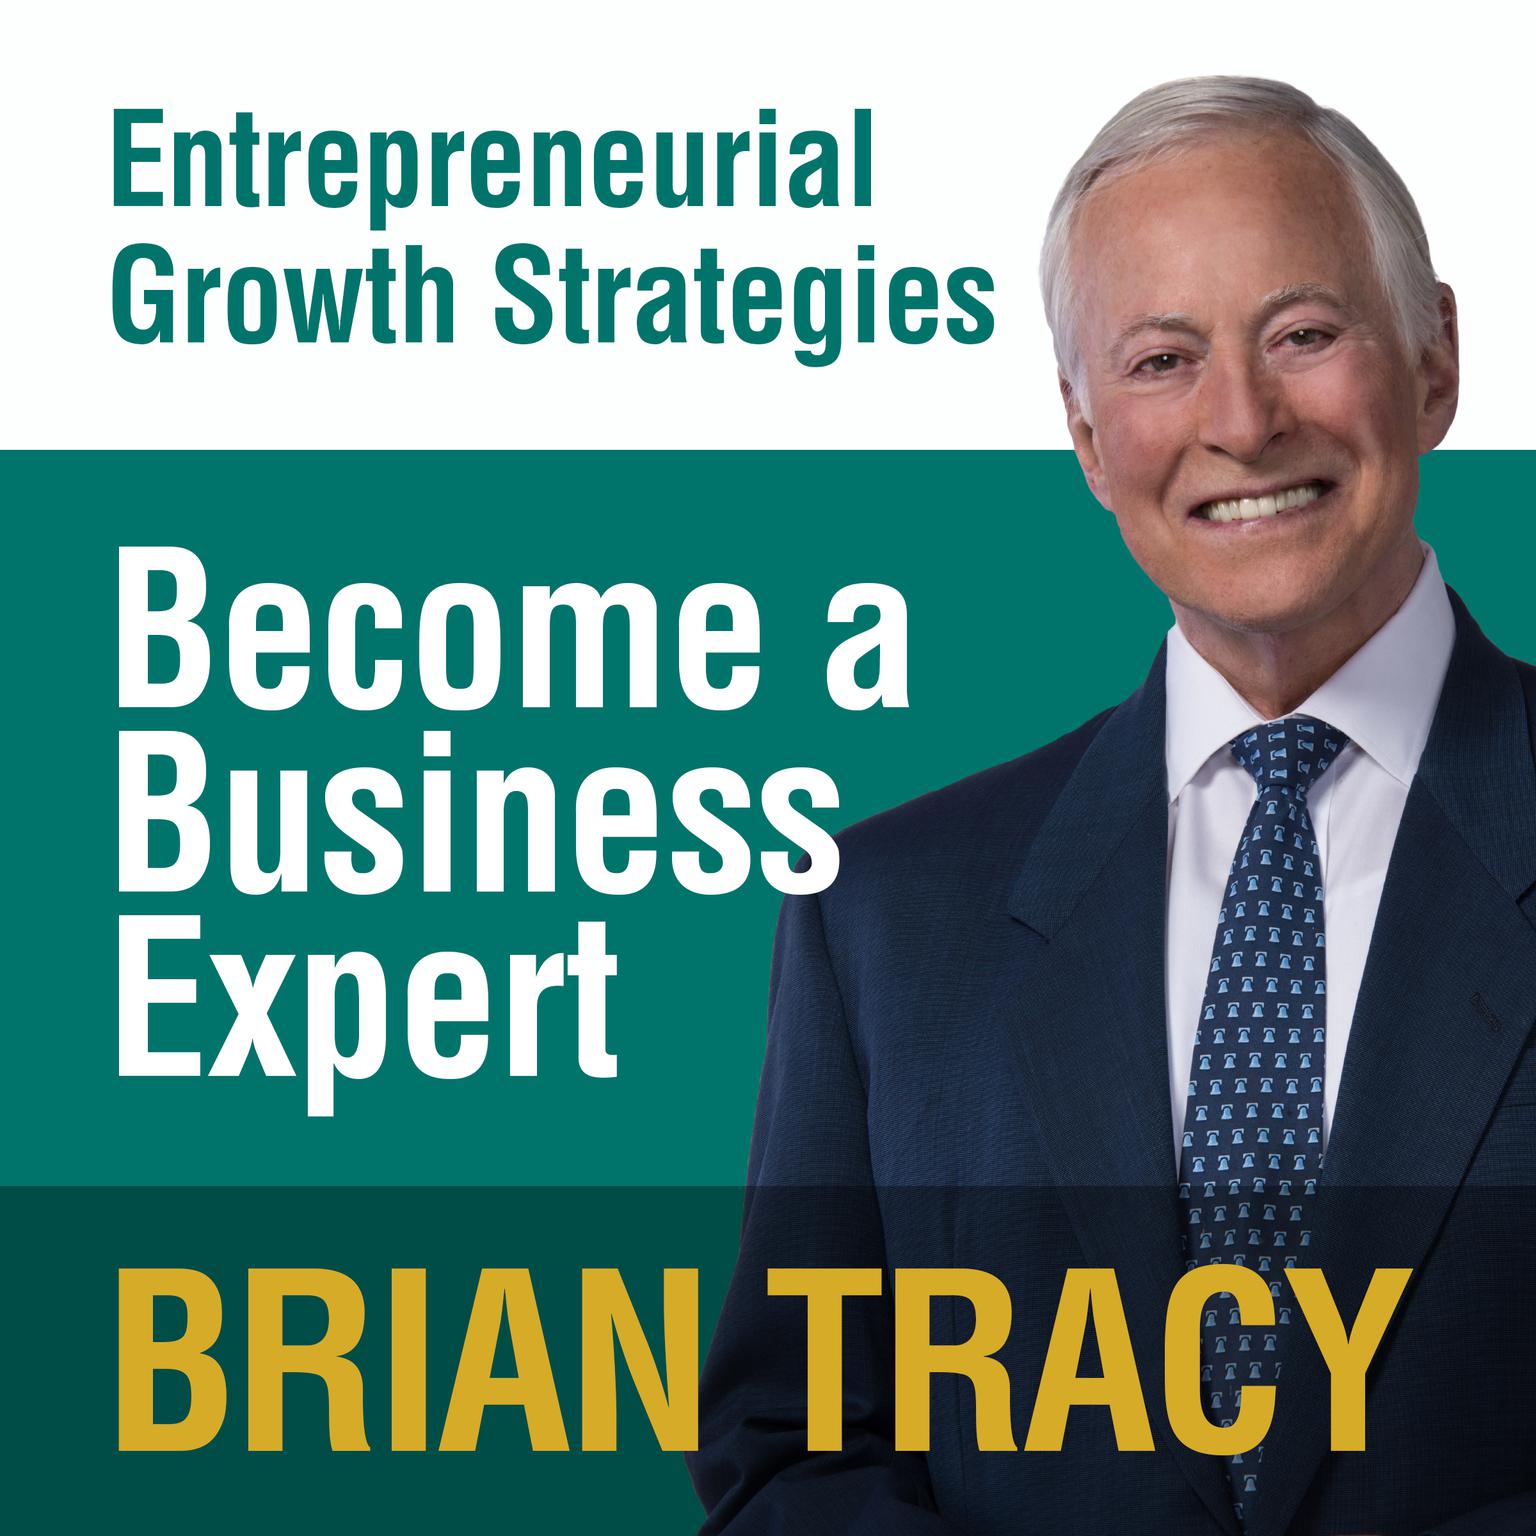 Become a Business Expert: Entrepreneural Growth Strategies Audiobook, by Brian Tracy